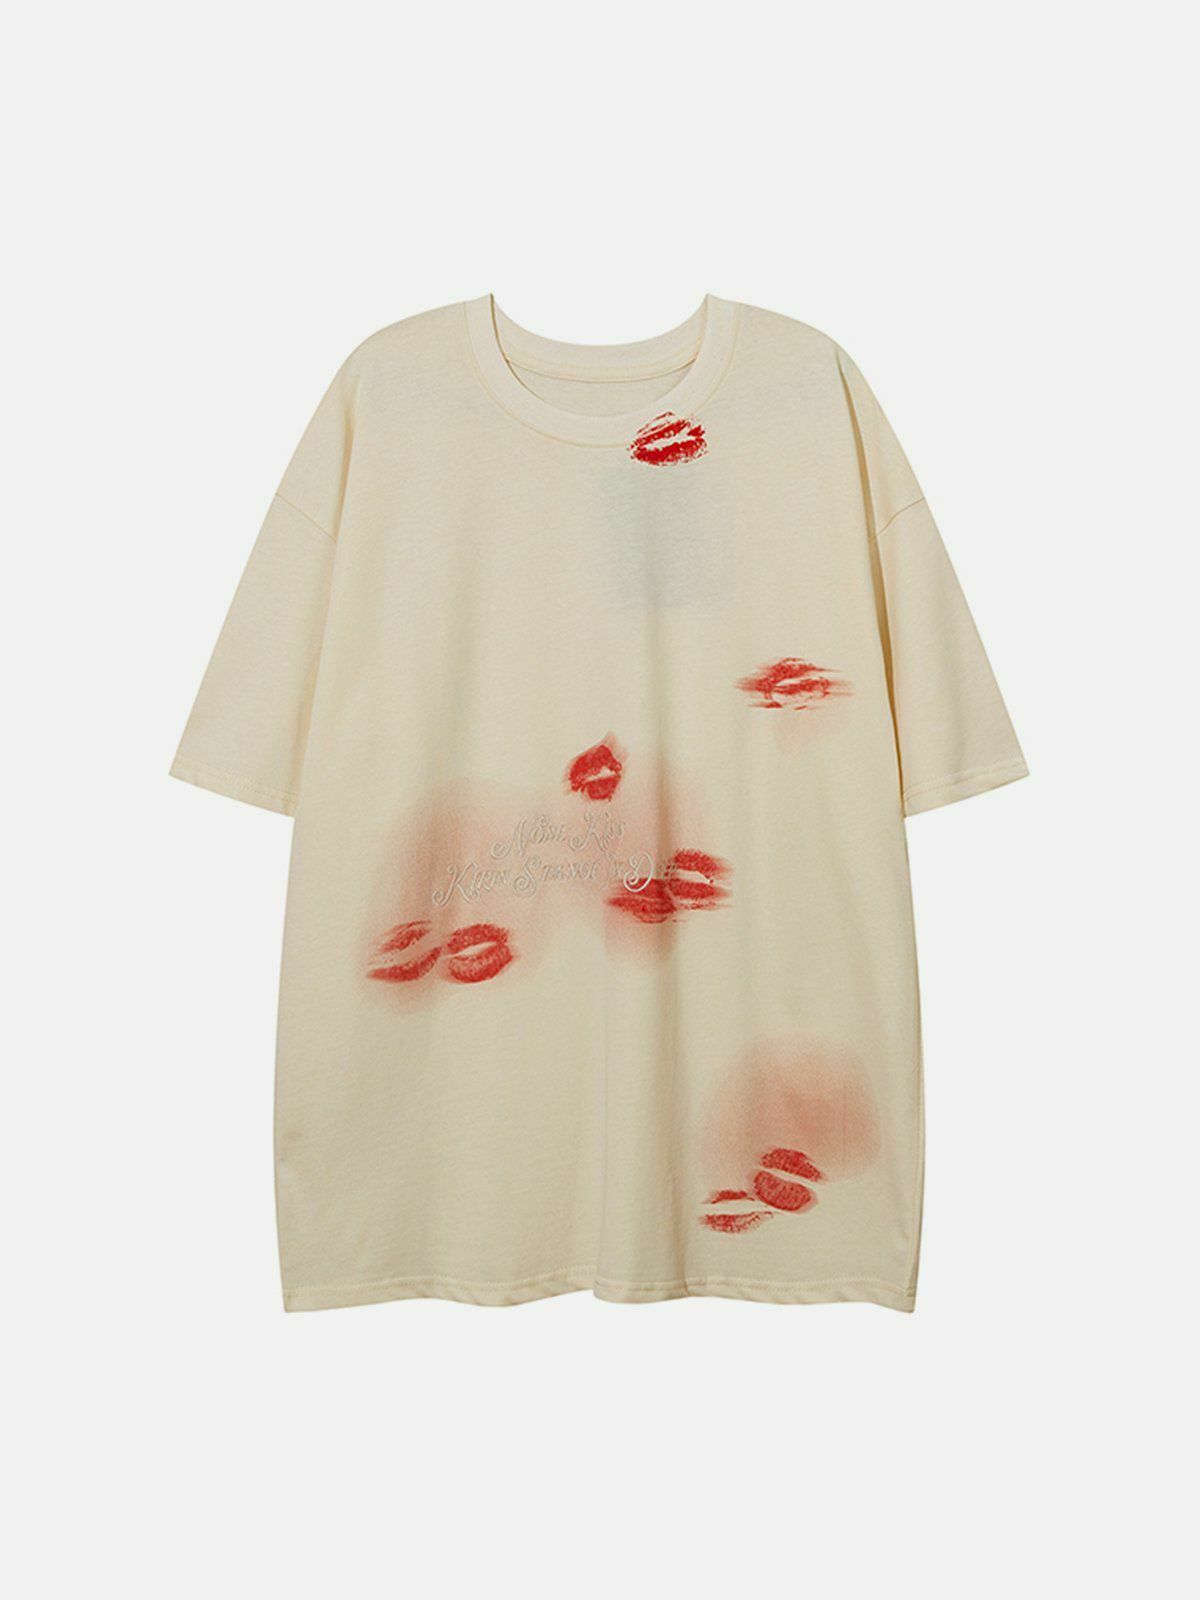 chic blow kisses tee with vibrant embroidery detail 7323